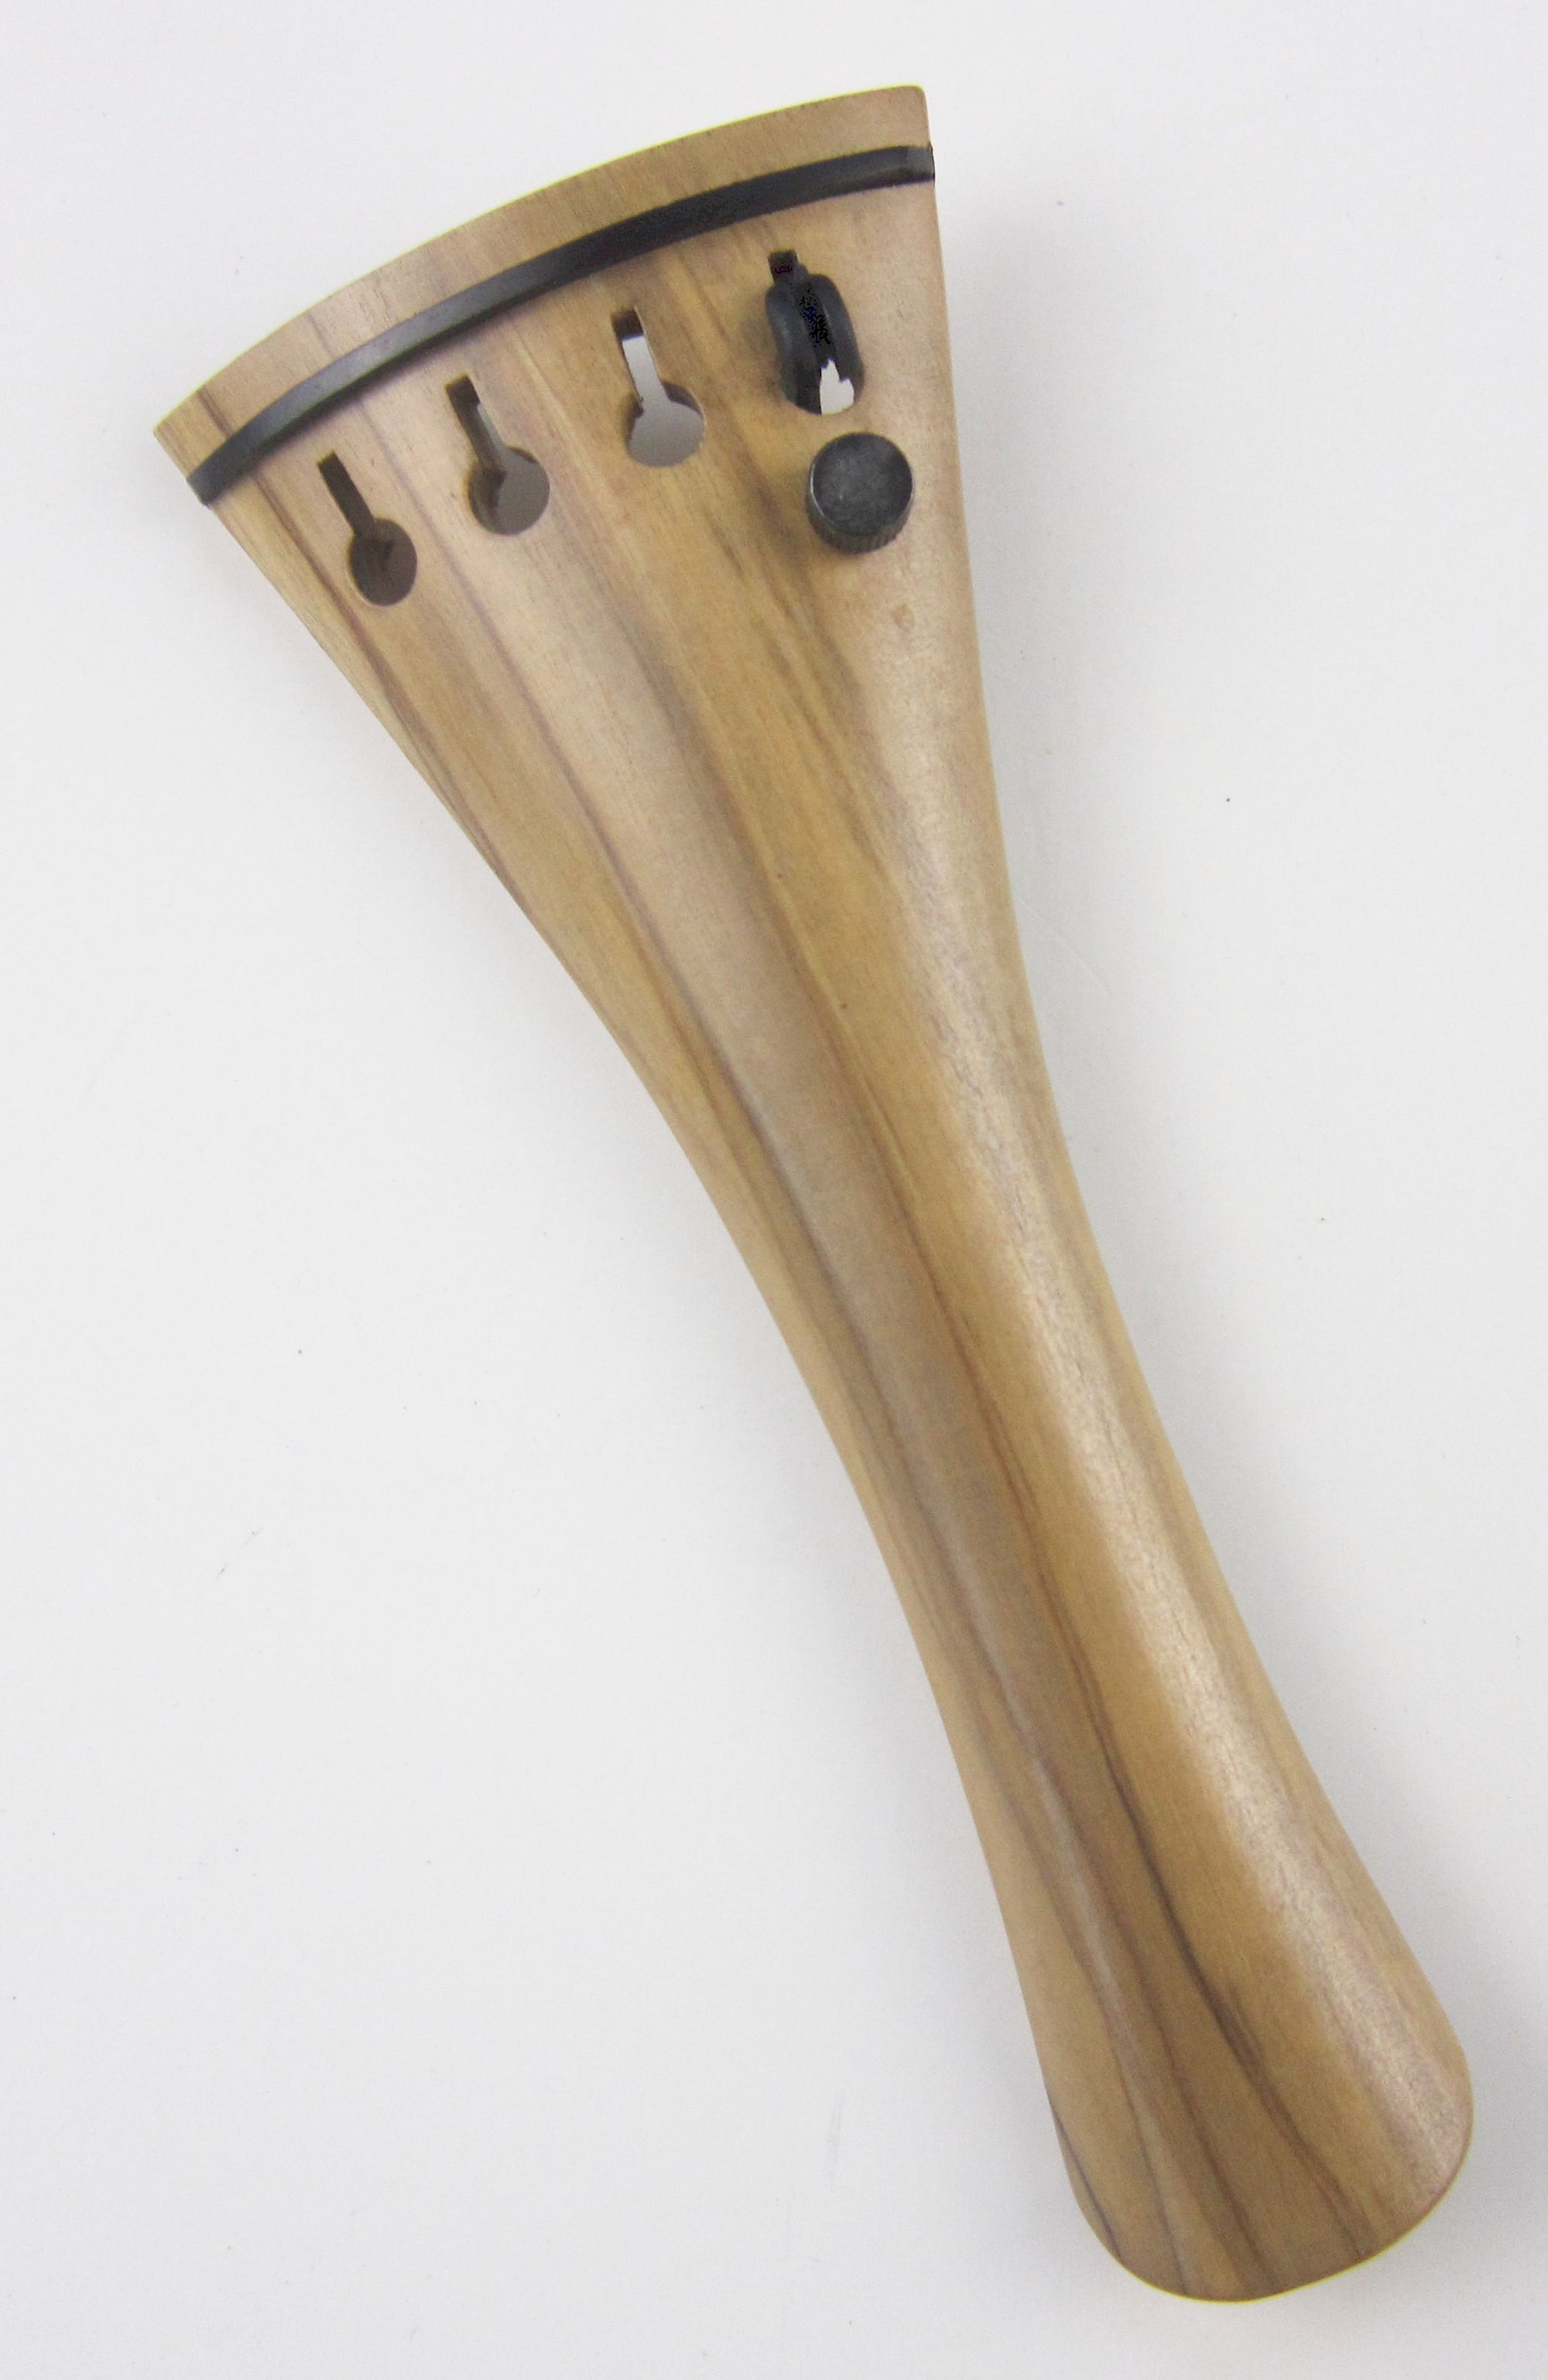 Viola tailpiece-French-Olive-Ebony saddle-1 carbon tuner-125mm